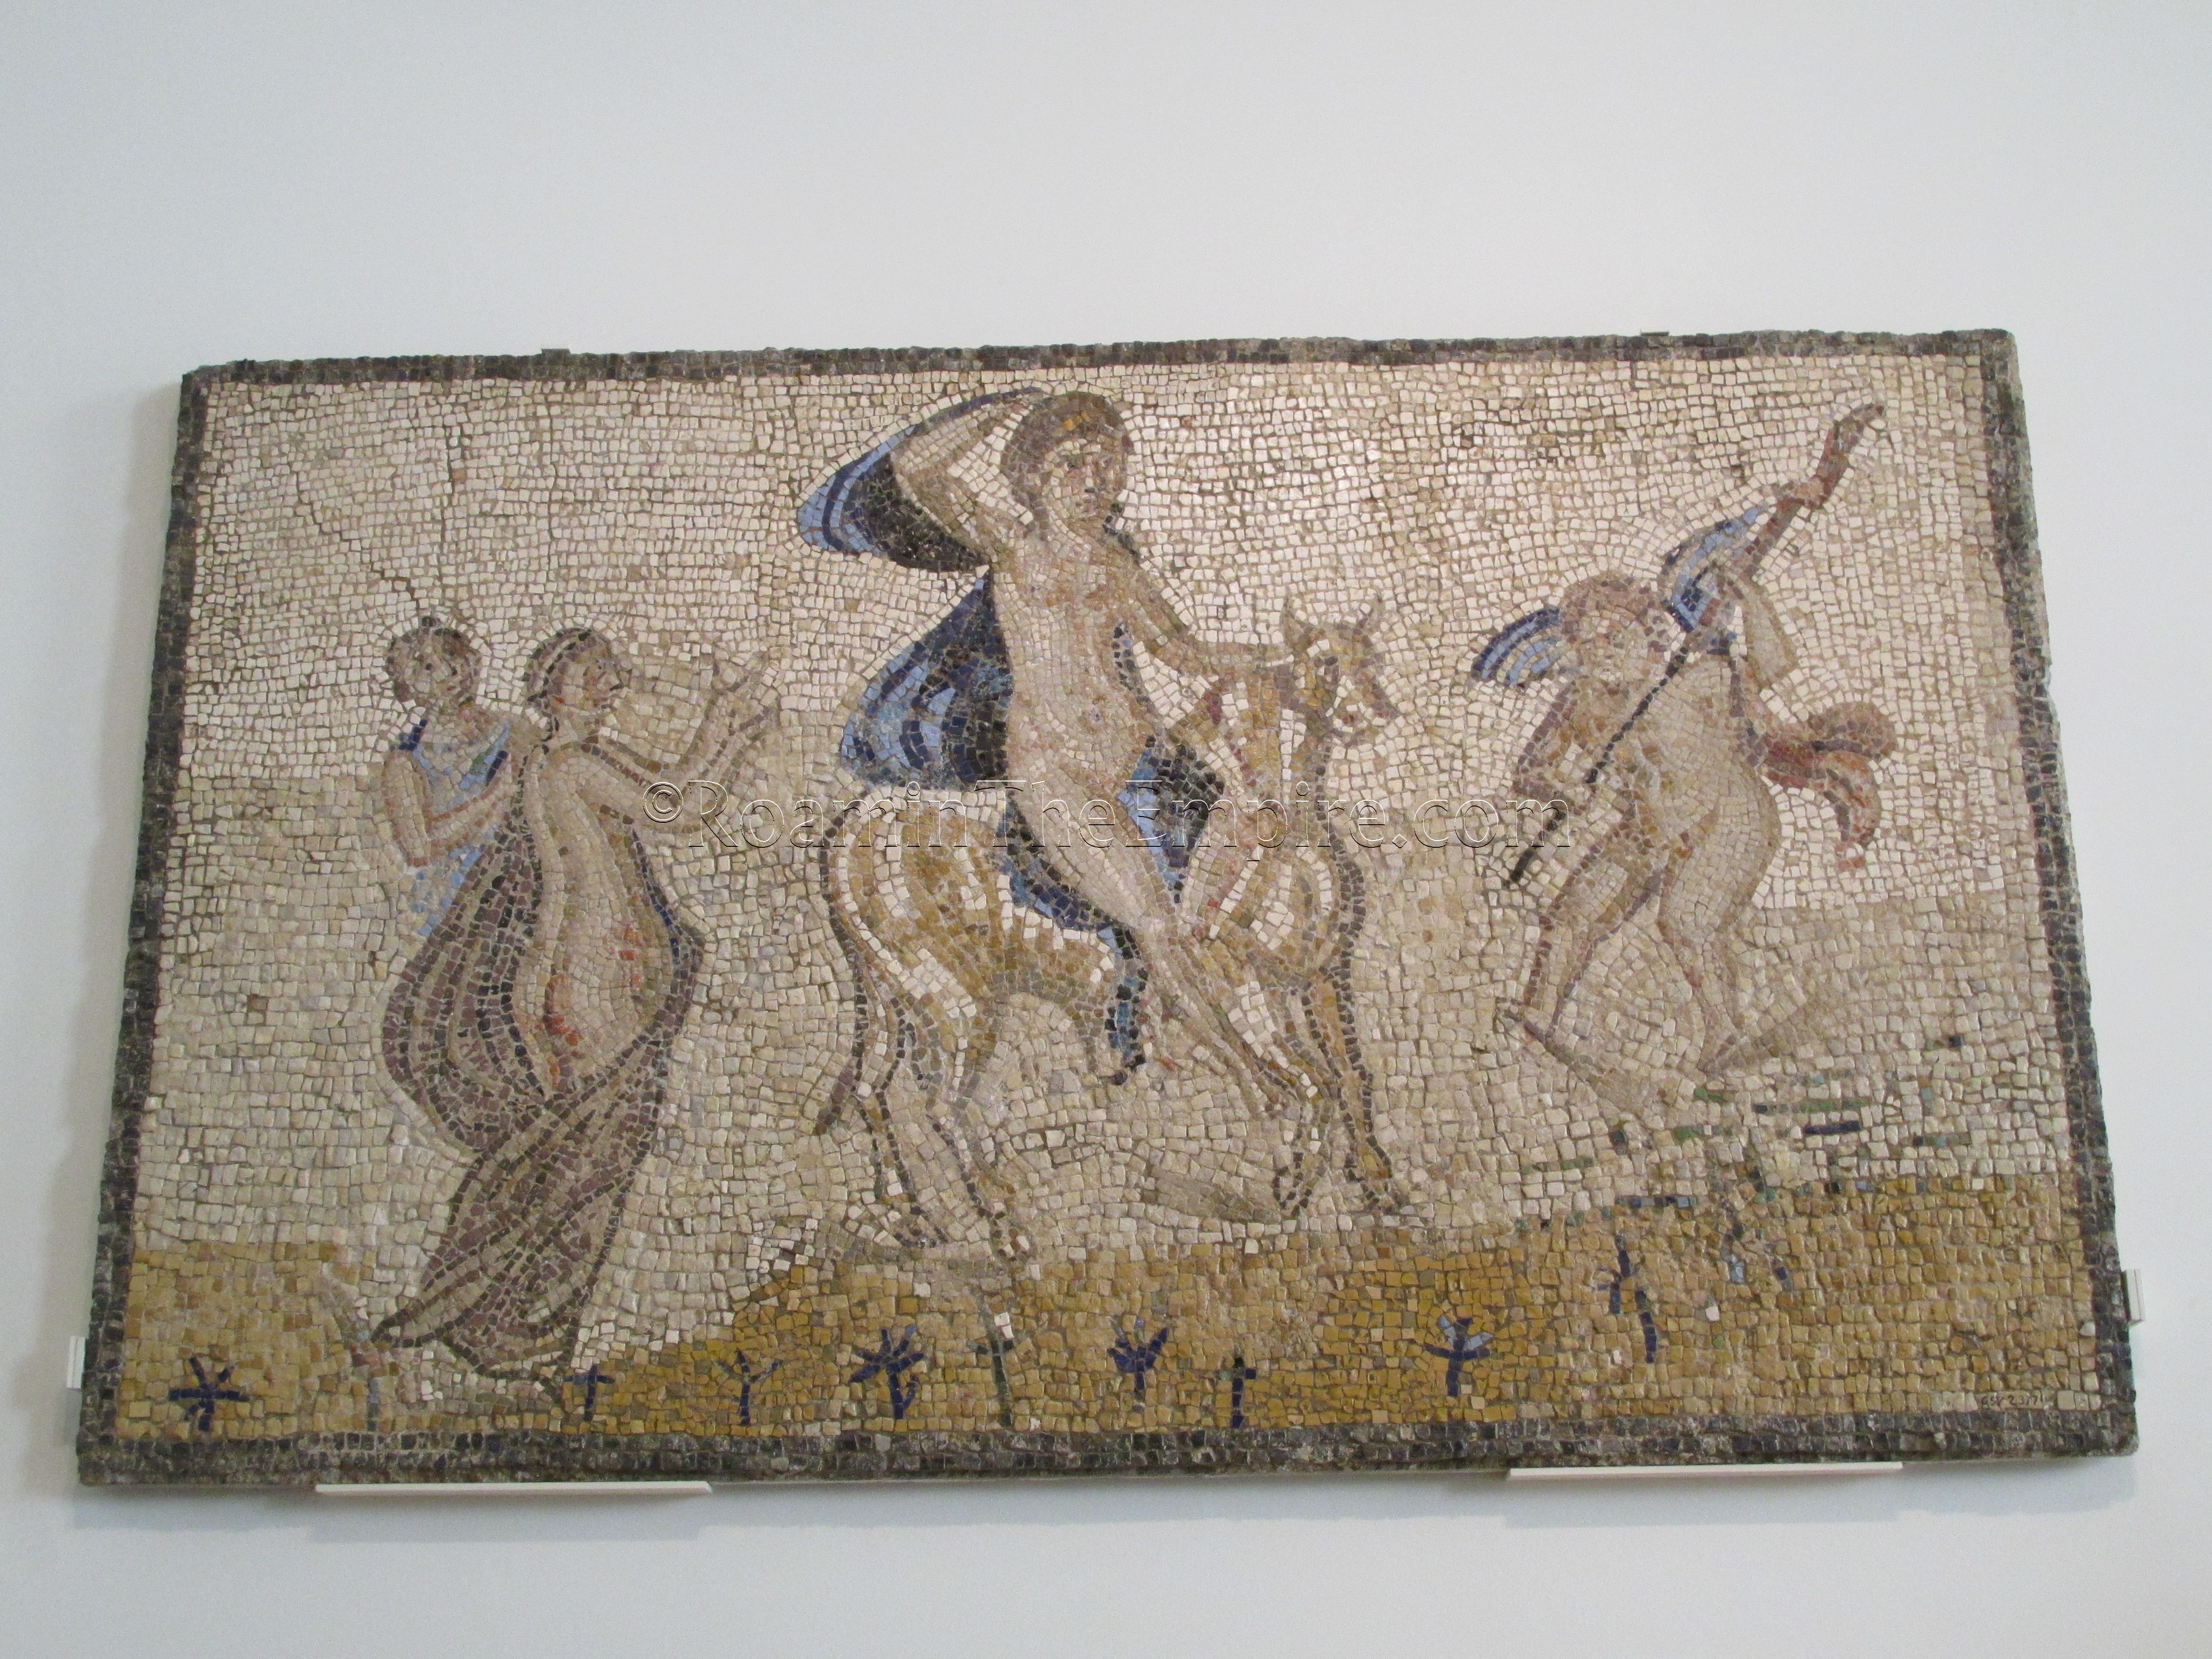 Mosaic depicting the Rape of Europa. Dated to the 3rd century CE. Found at Fernán-Núñez, Spain. Madrid.